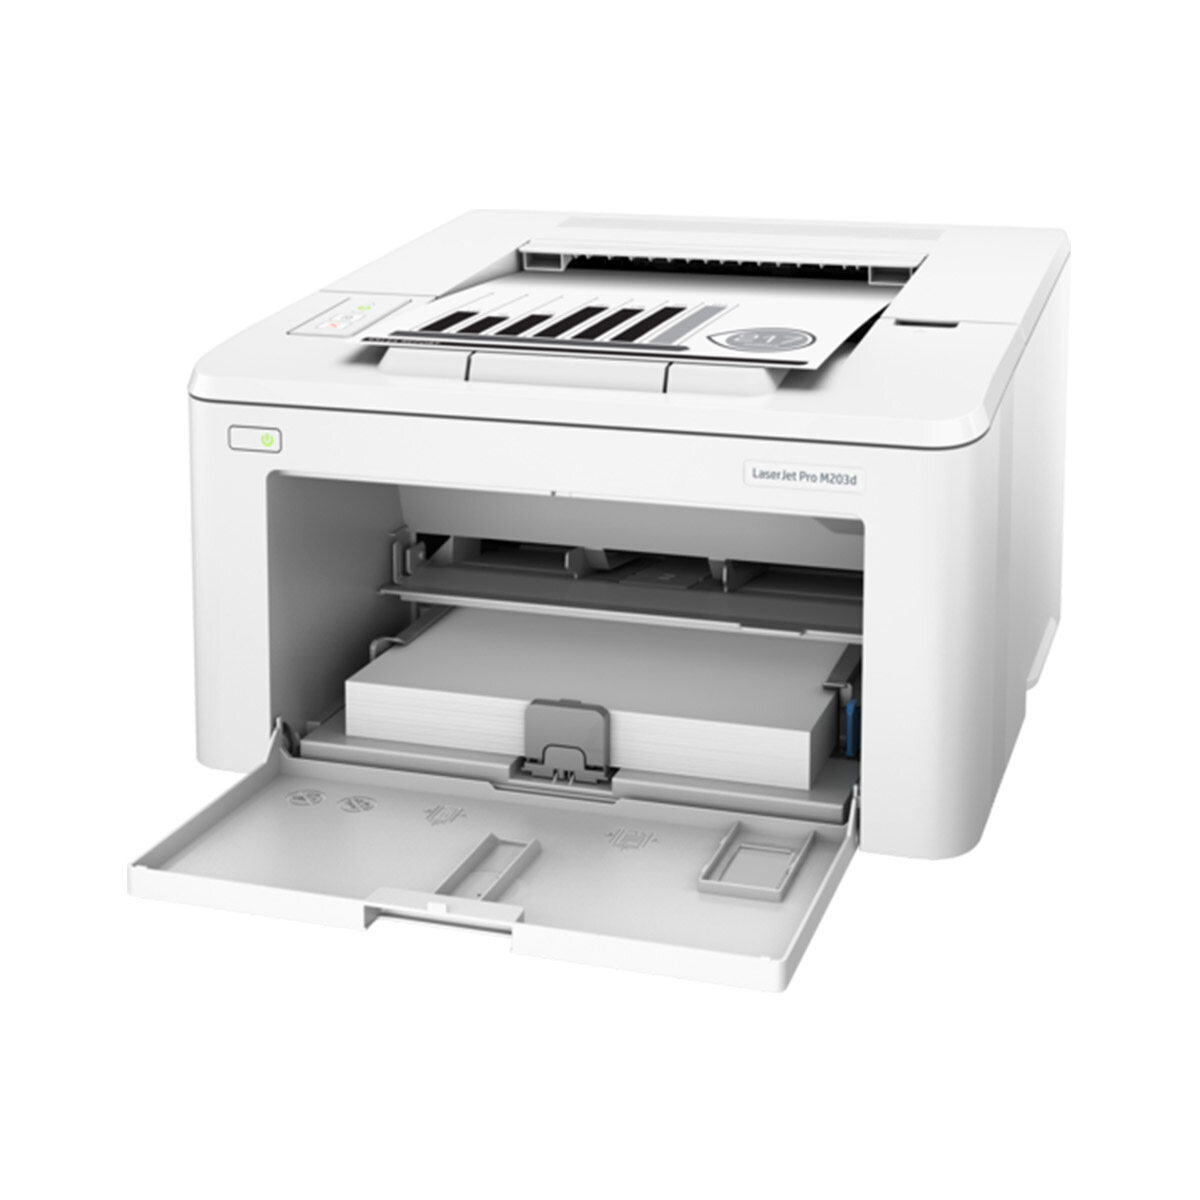 HP LaserJet Pro M203d Printer (Duplex Printing) 3 Years Onsite Warranty with 1-to-1 Unit exchange **NEED TO ONLINE REGISTER**